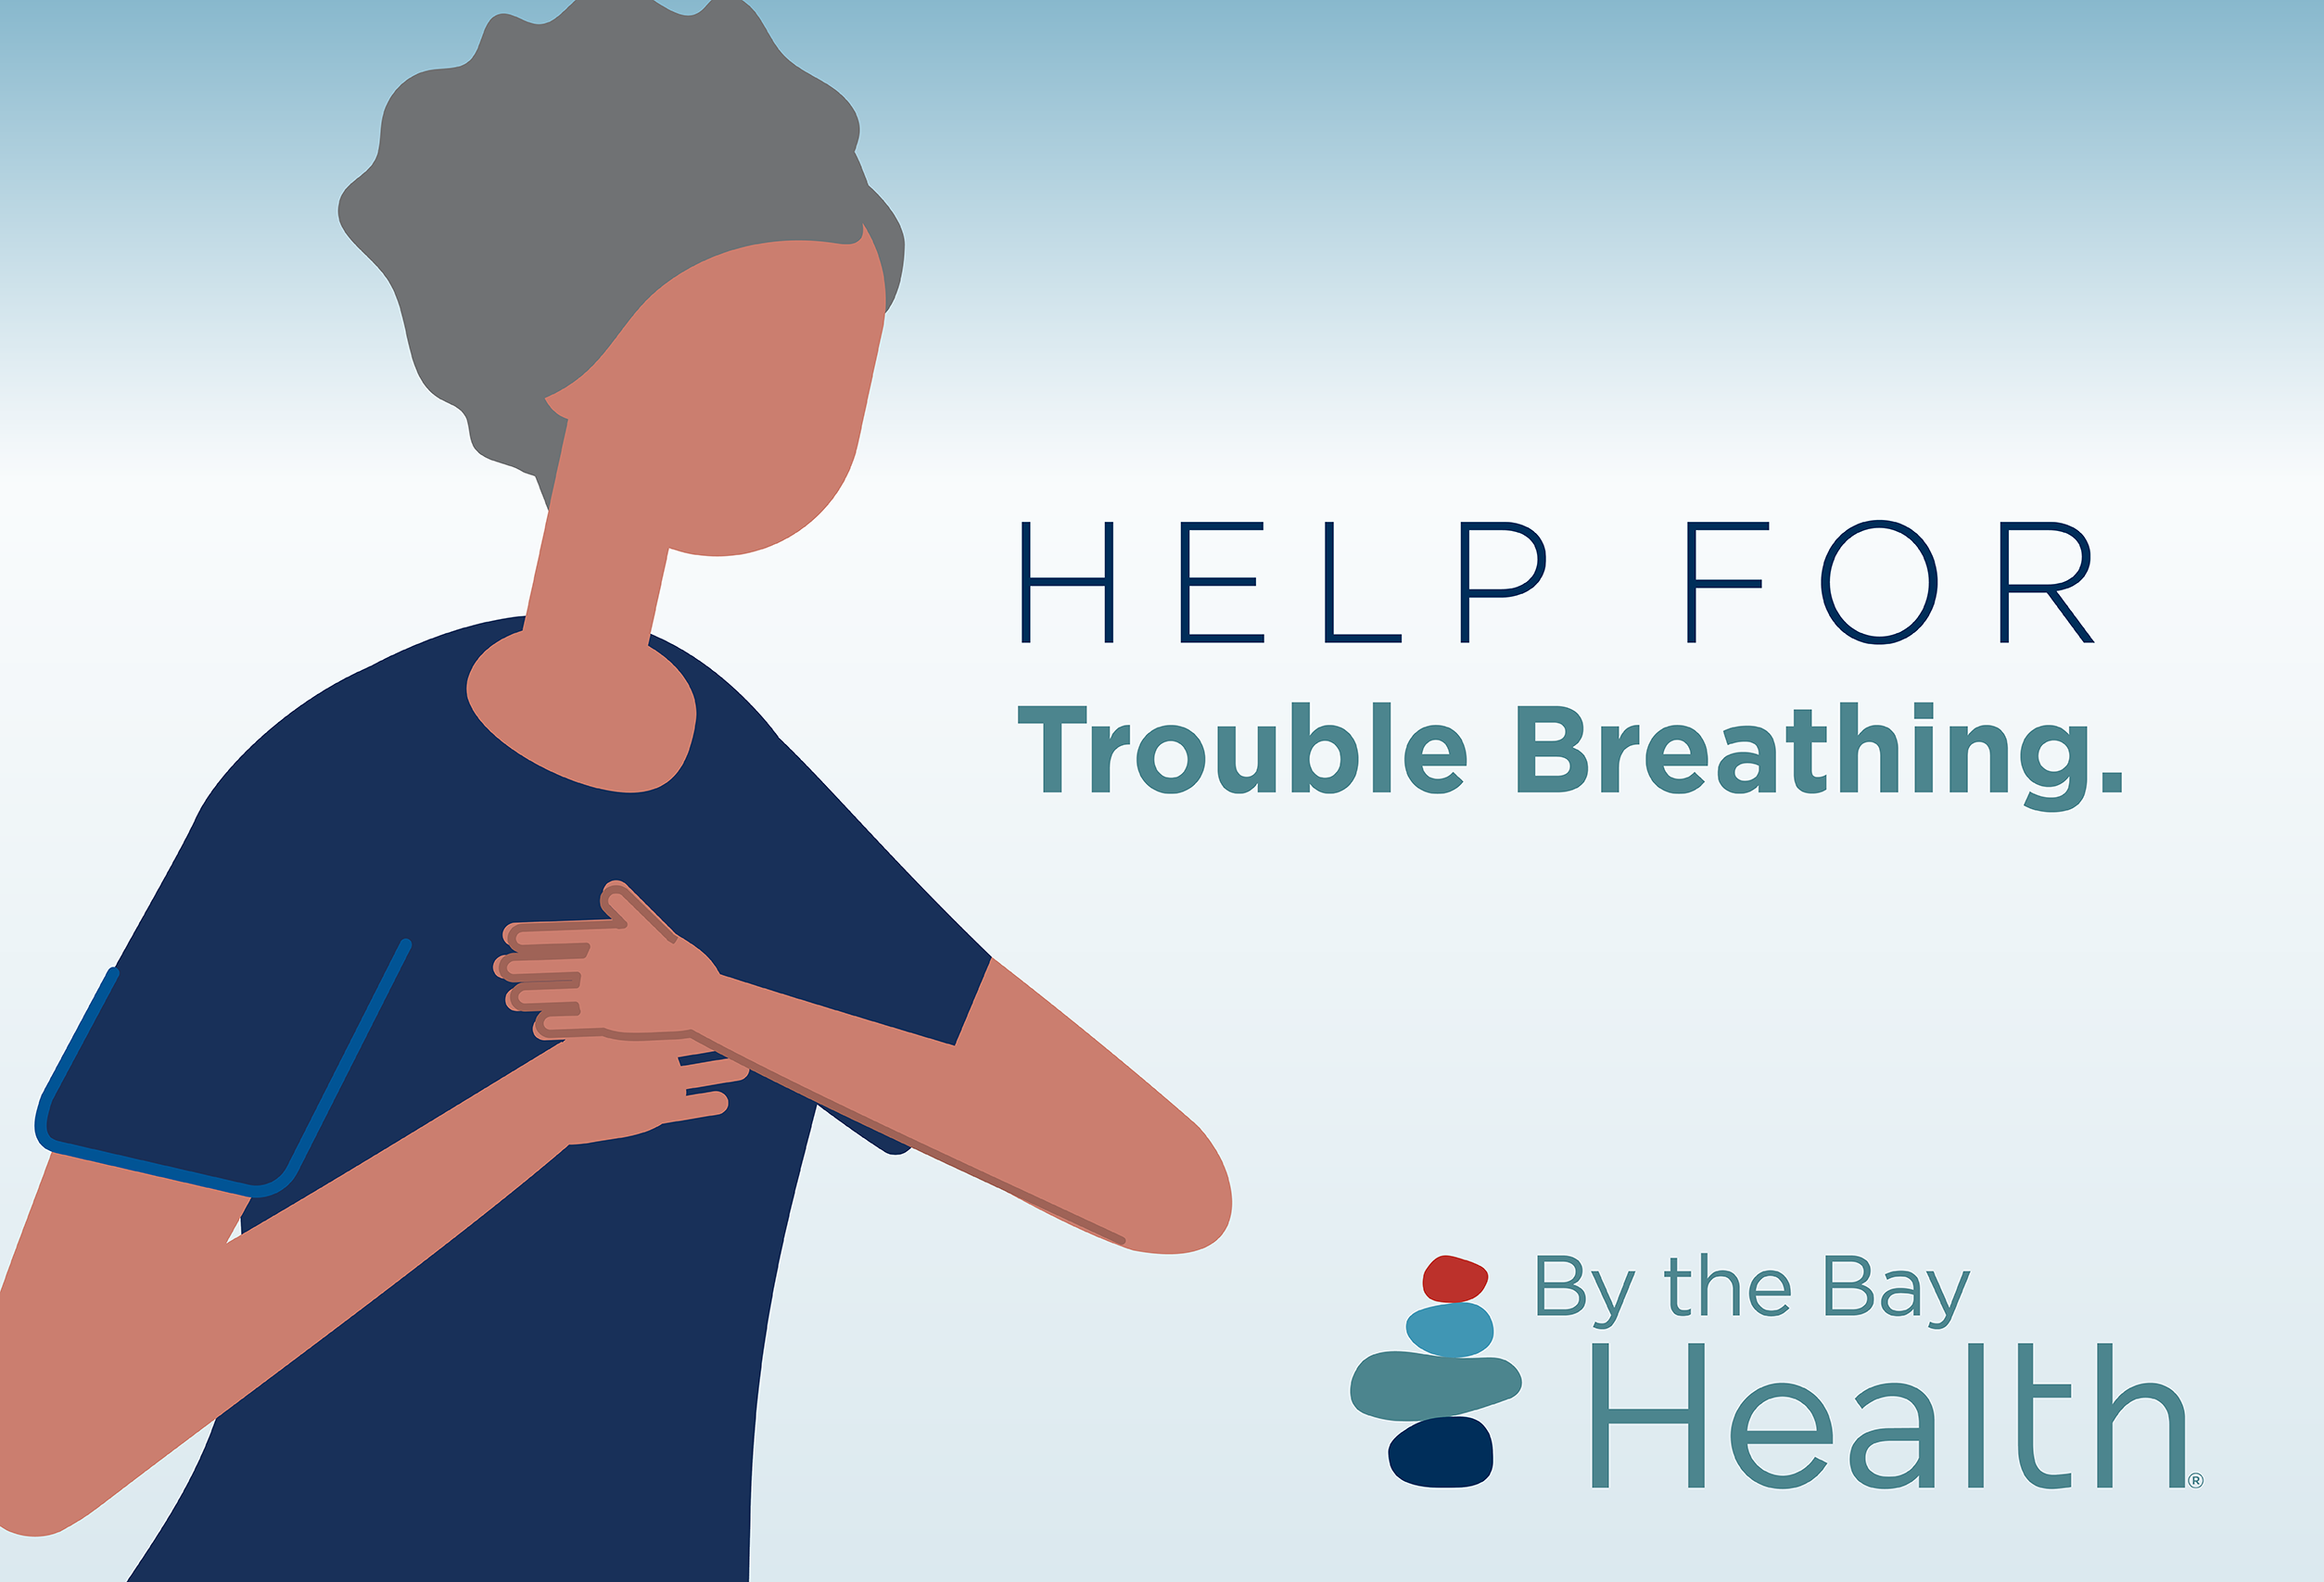 Help for trouble breathing